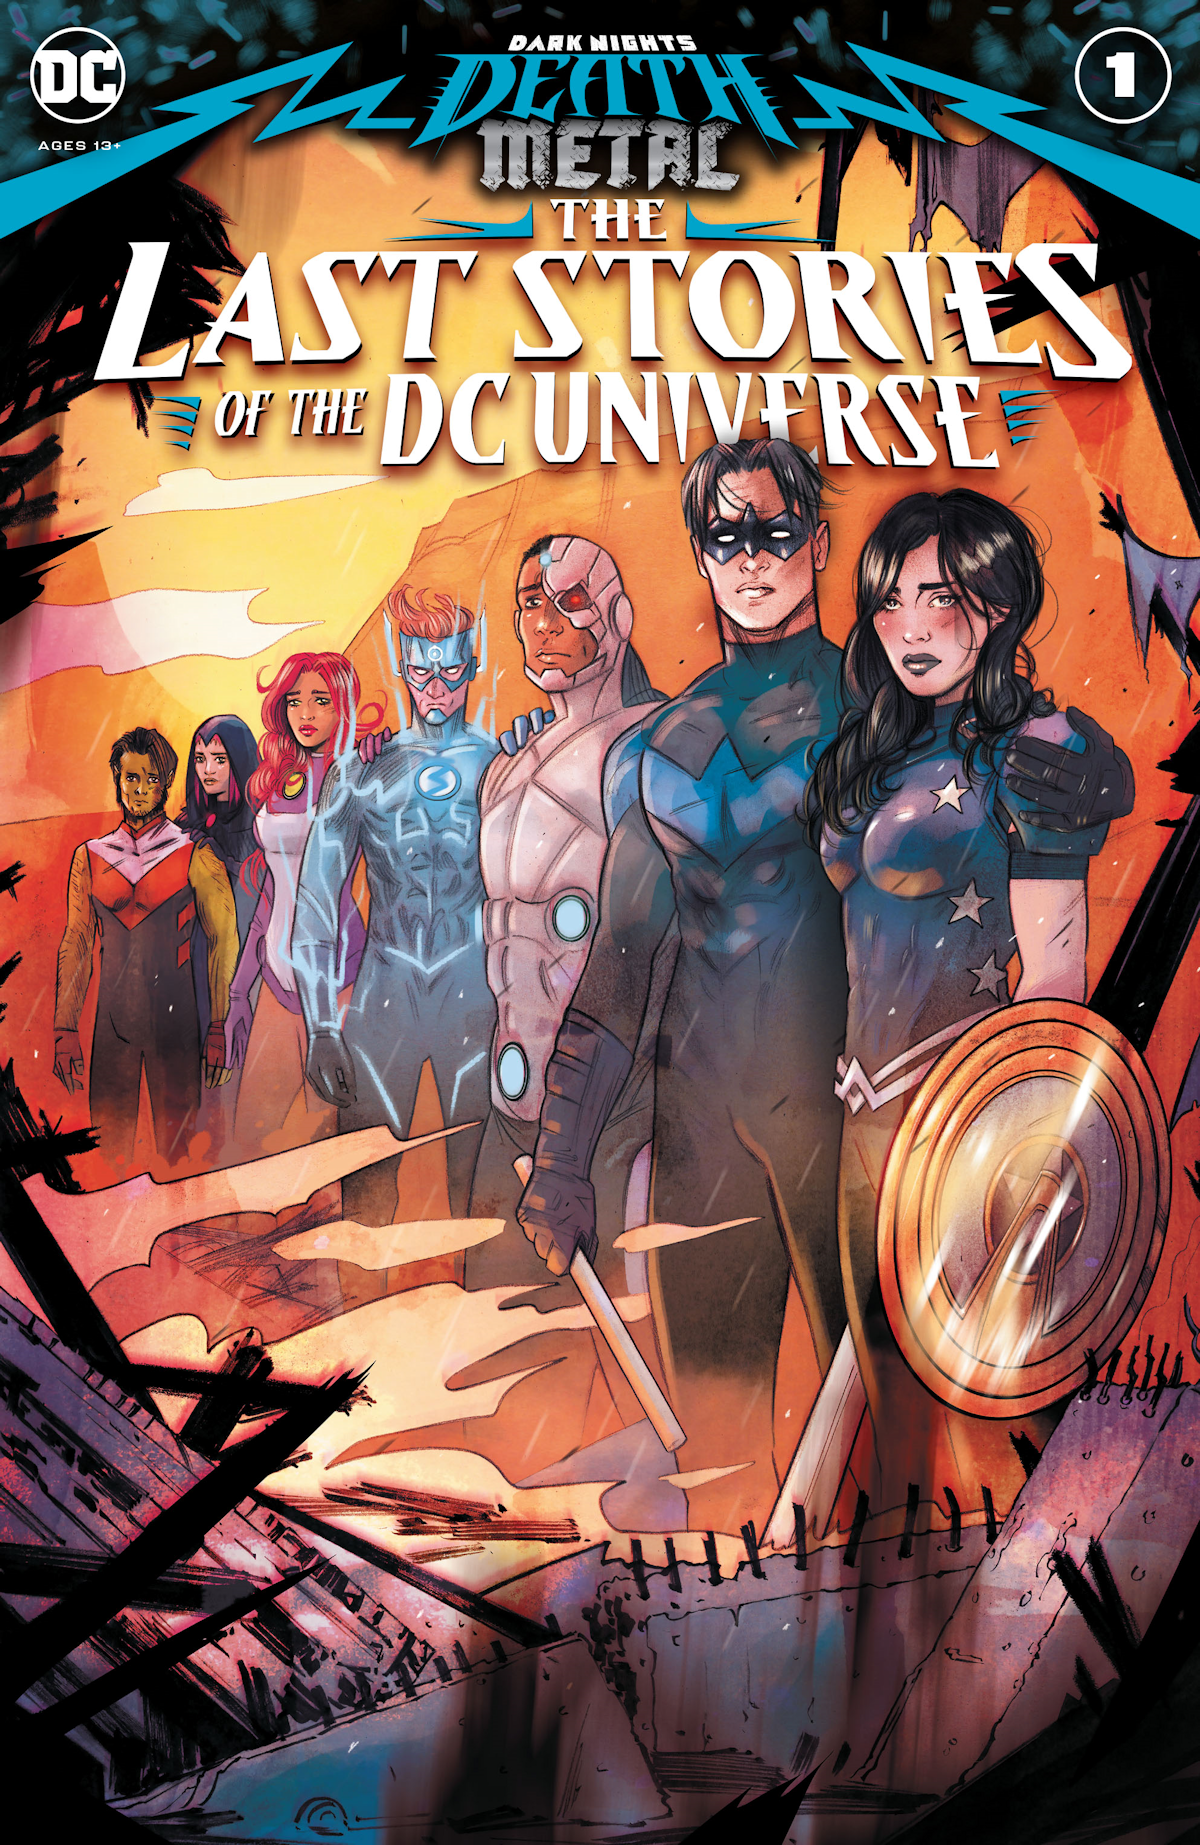 Dark Nights: Death Metal The Last Stories of the DC Universe 1 (Cover A)